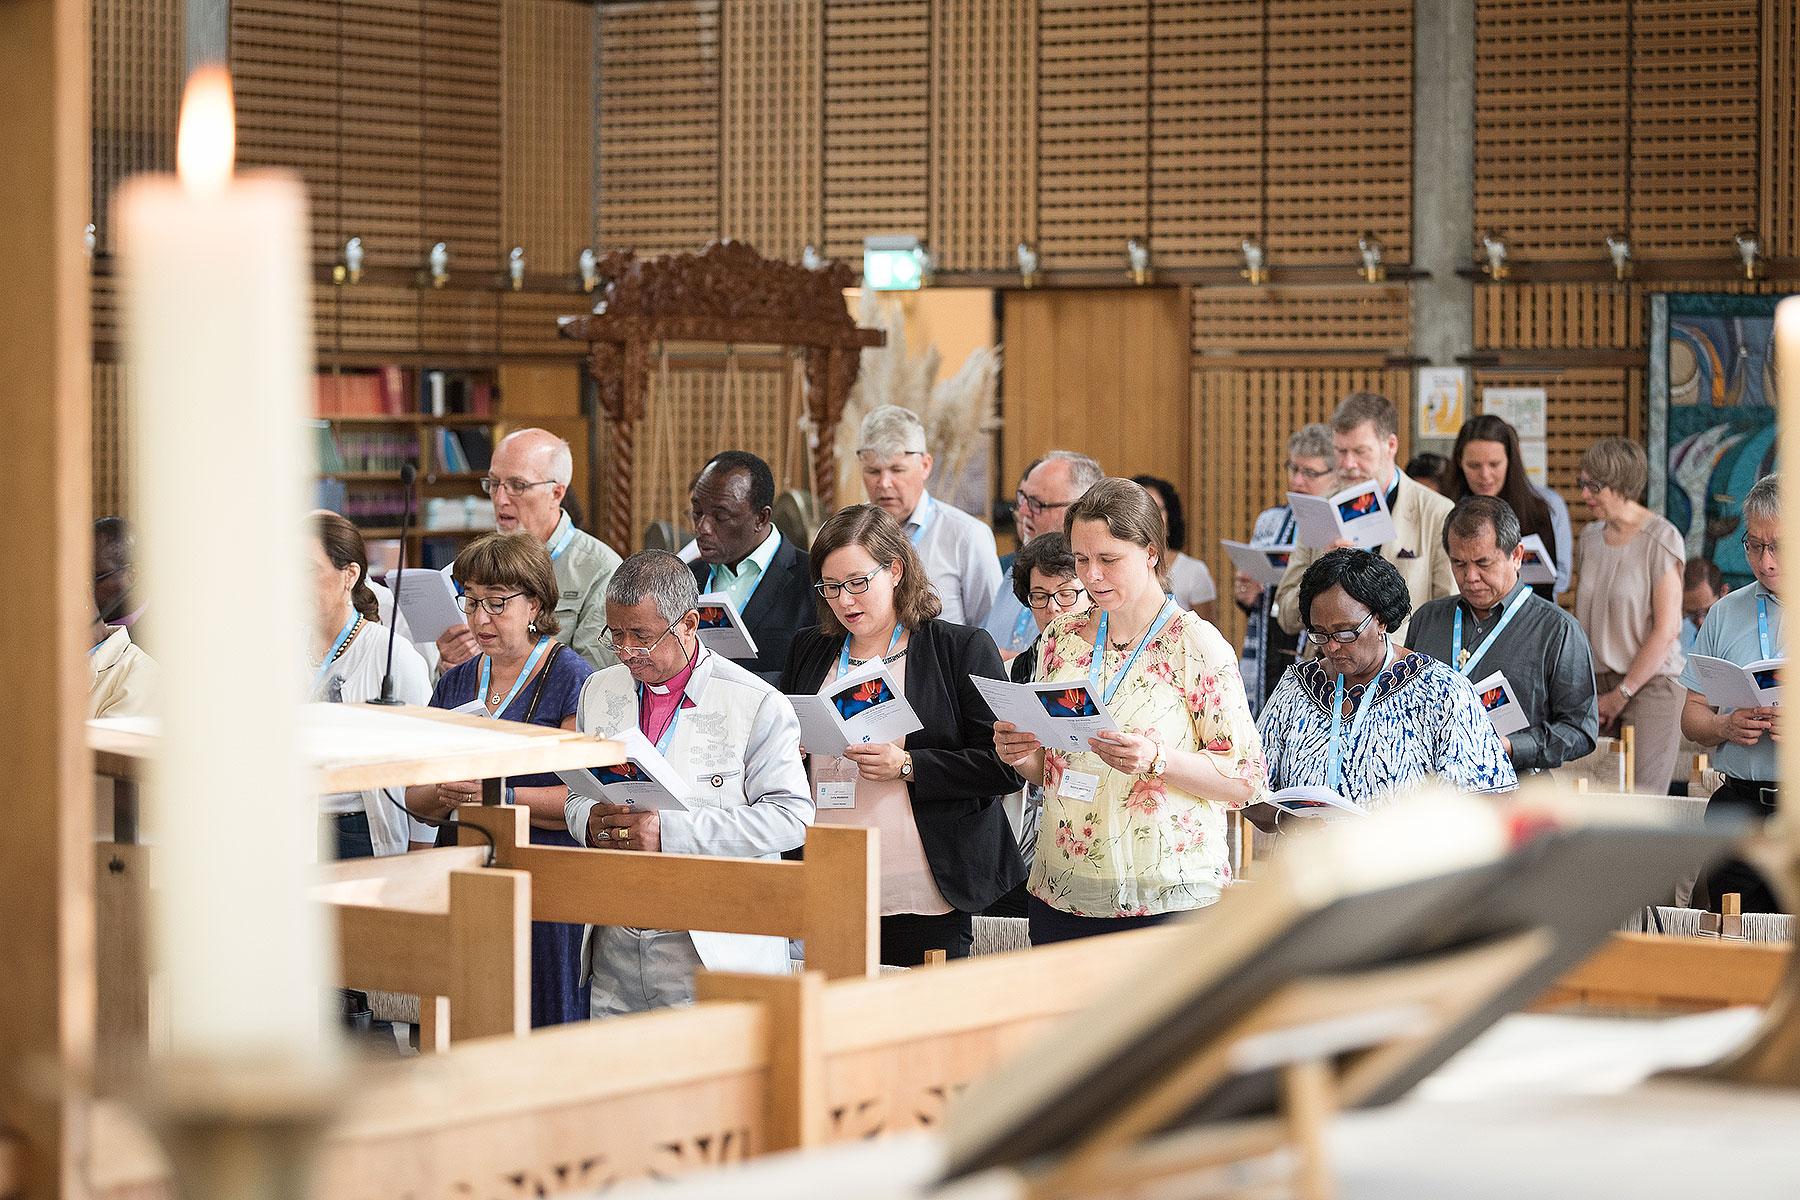 LWF Council members in the Ecumenical Center Chapel, during the opening worship service of the 2018 meeting. Photo: LWF/Albin Hillert